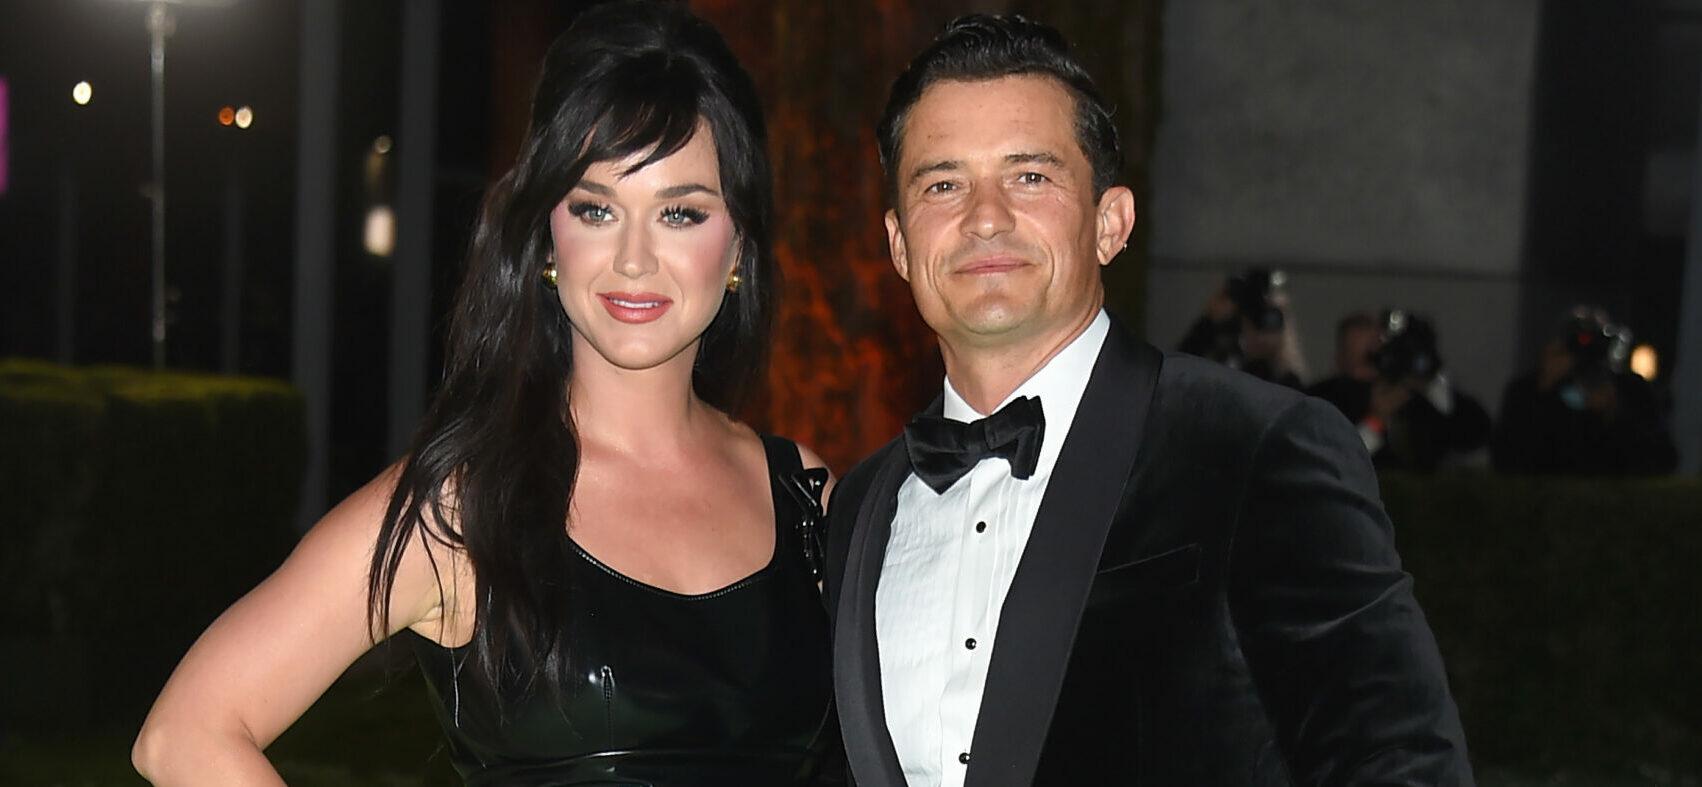 Orlando Bloom Says Katy Perry Relationship Is Sometimes ‘Really Challenging’